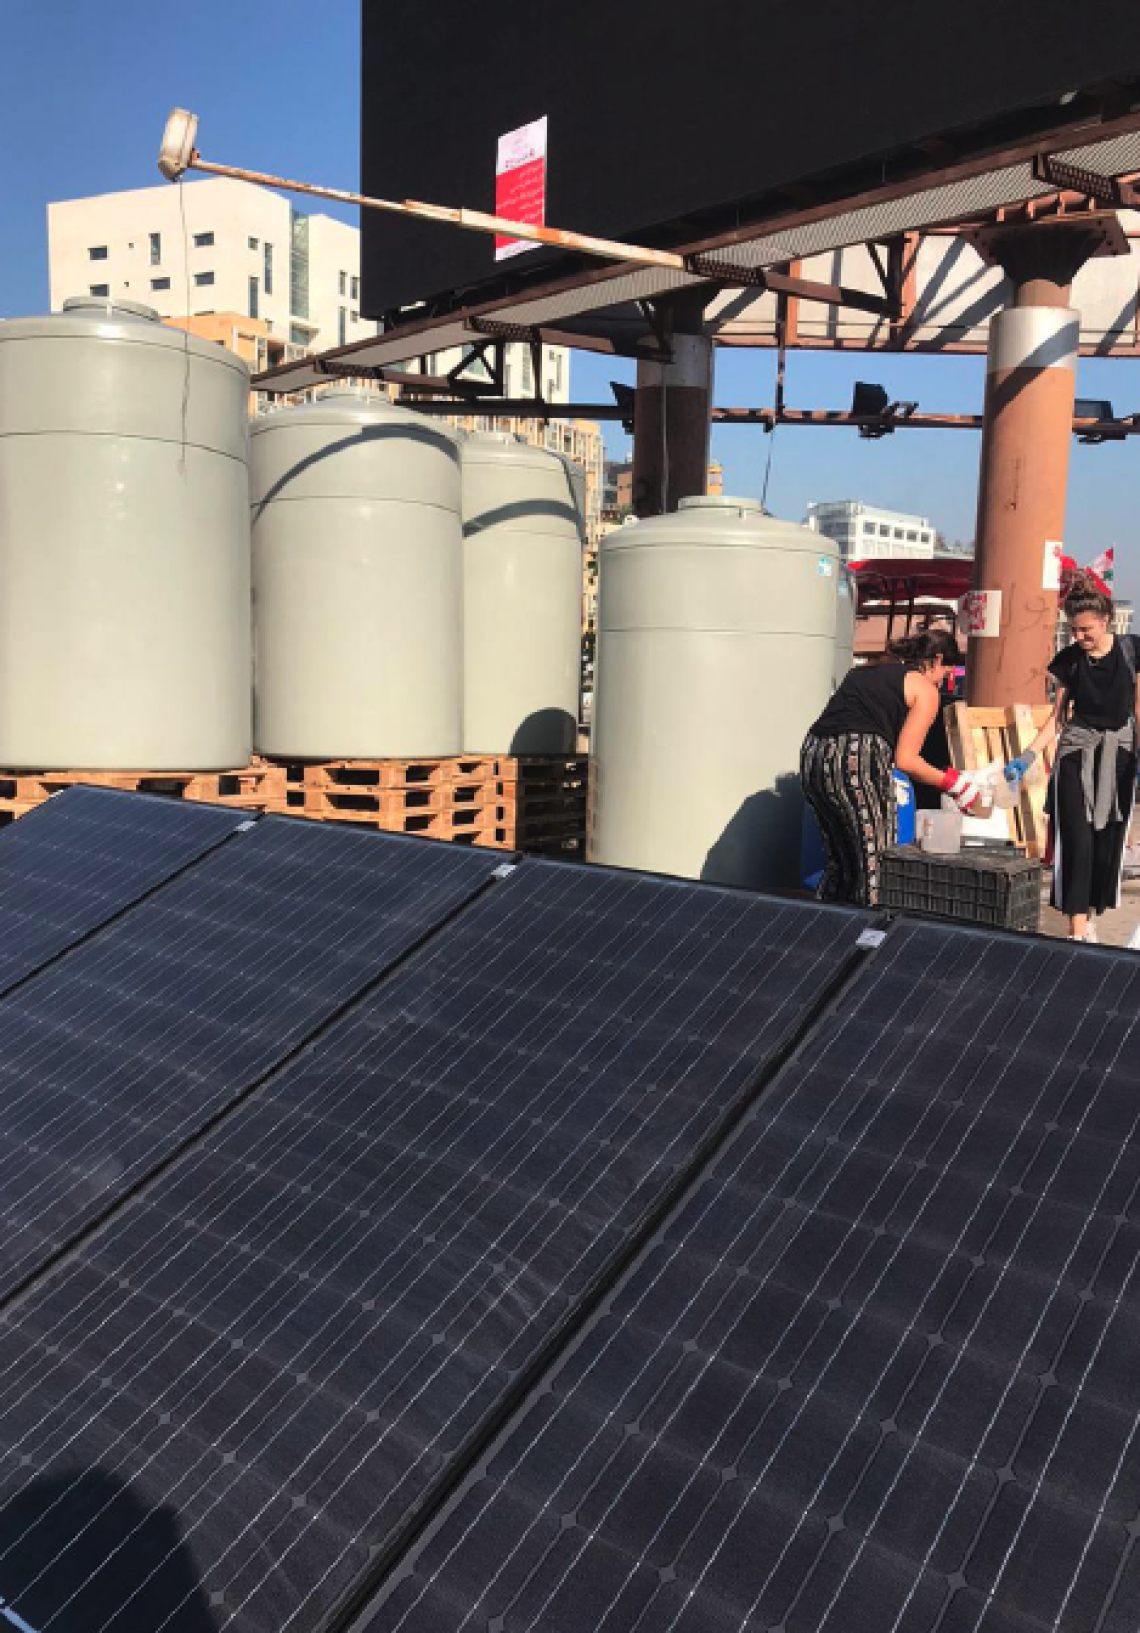 Solar panels and water tanks set up by Regenerate Lebanon and partners